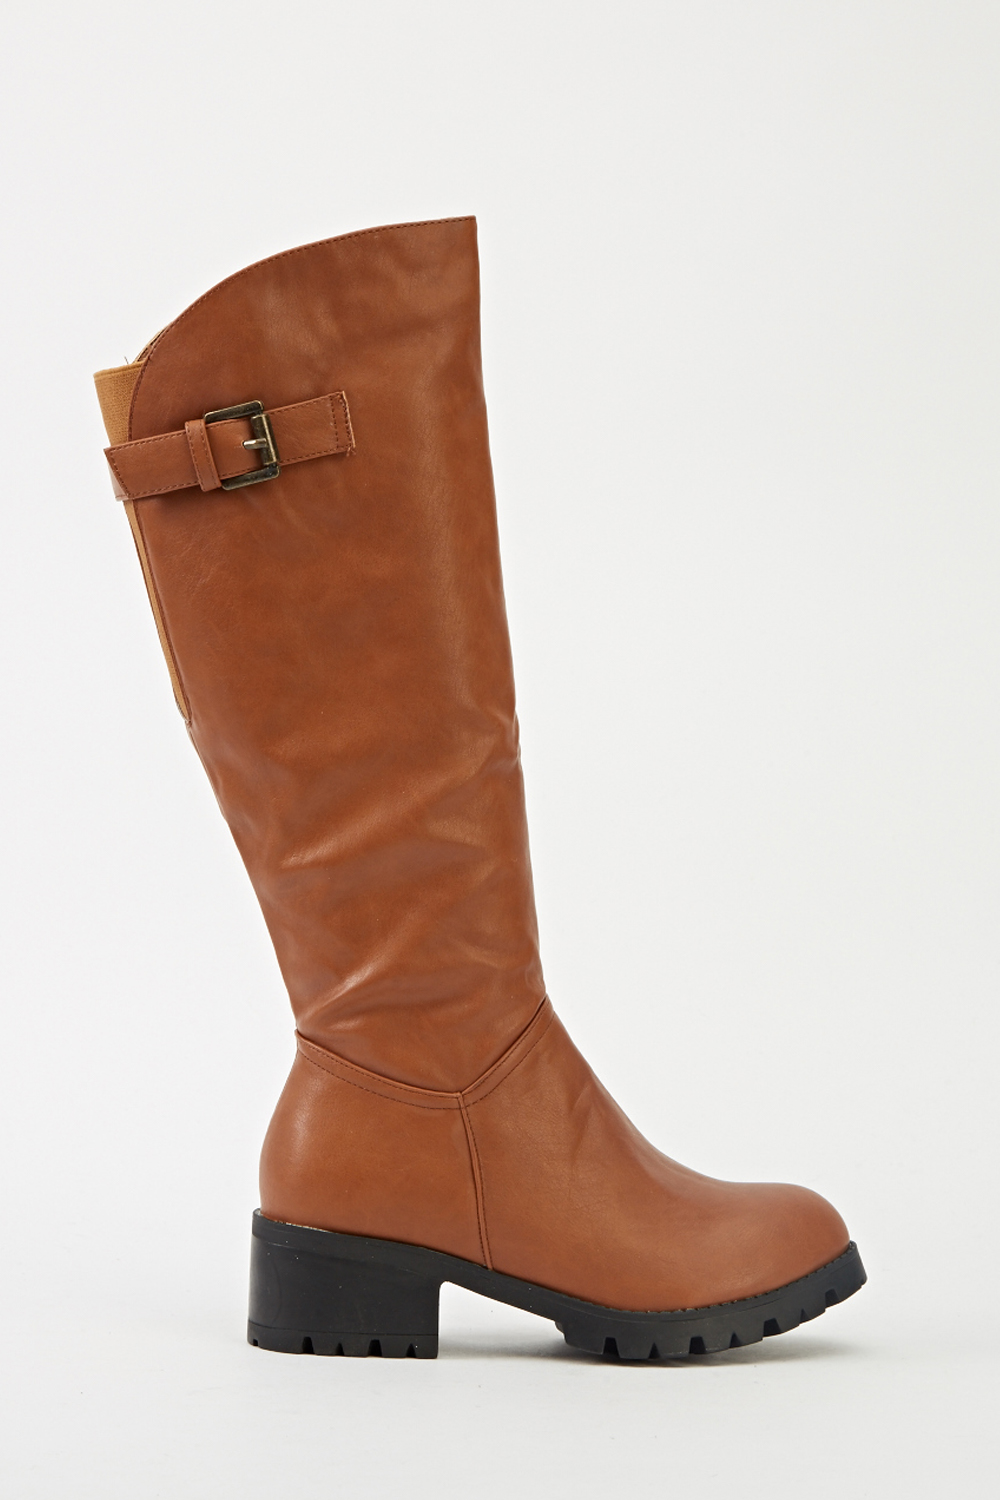 Camel Knee High Boots - Just $7